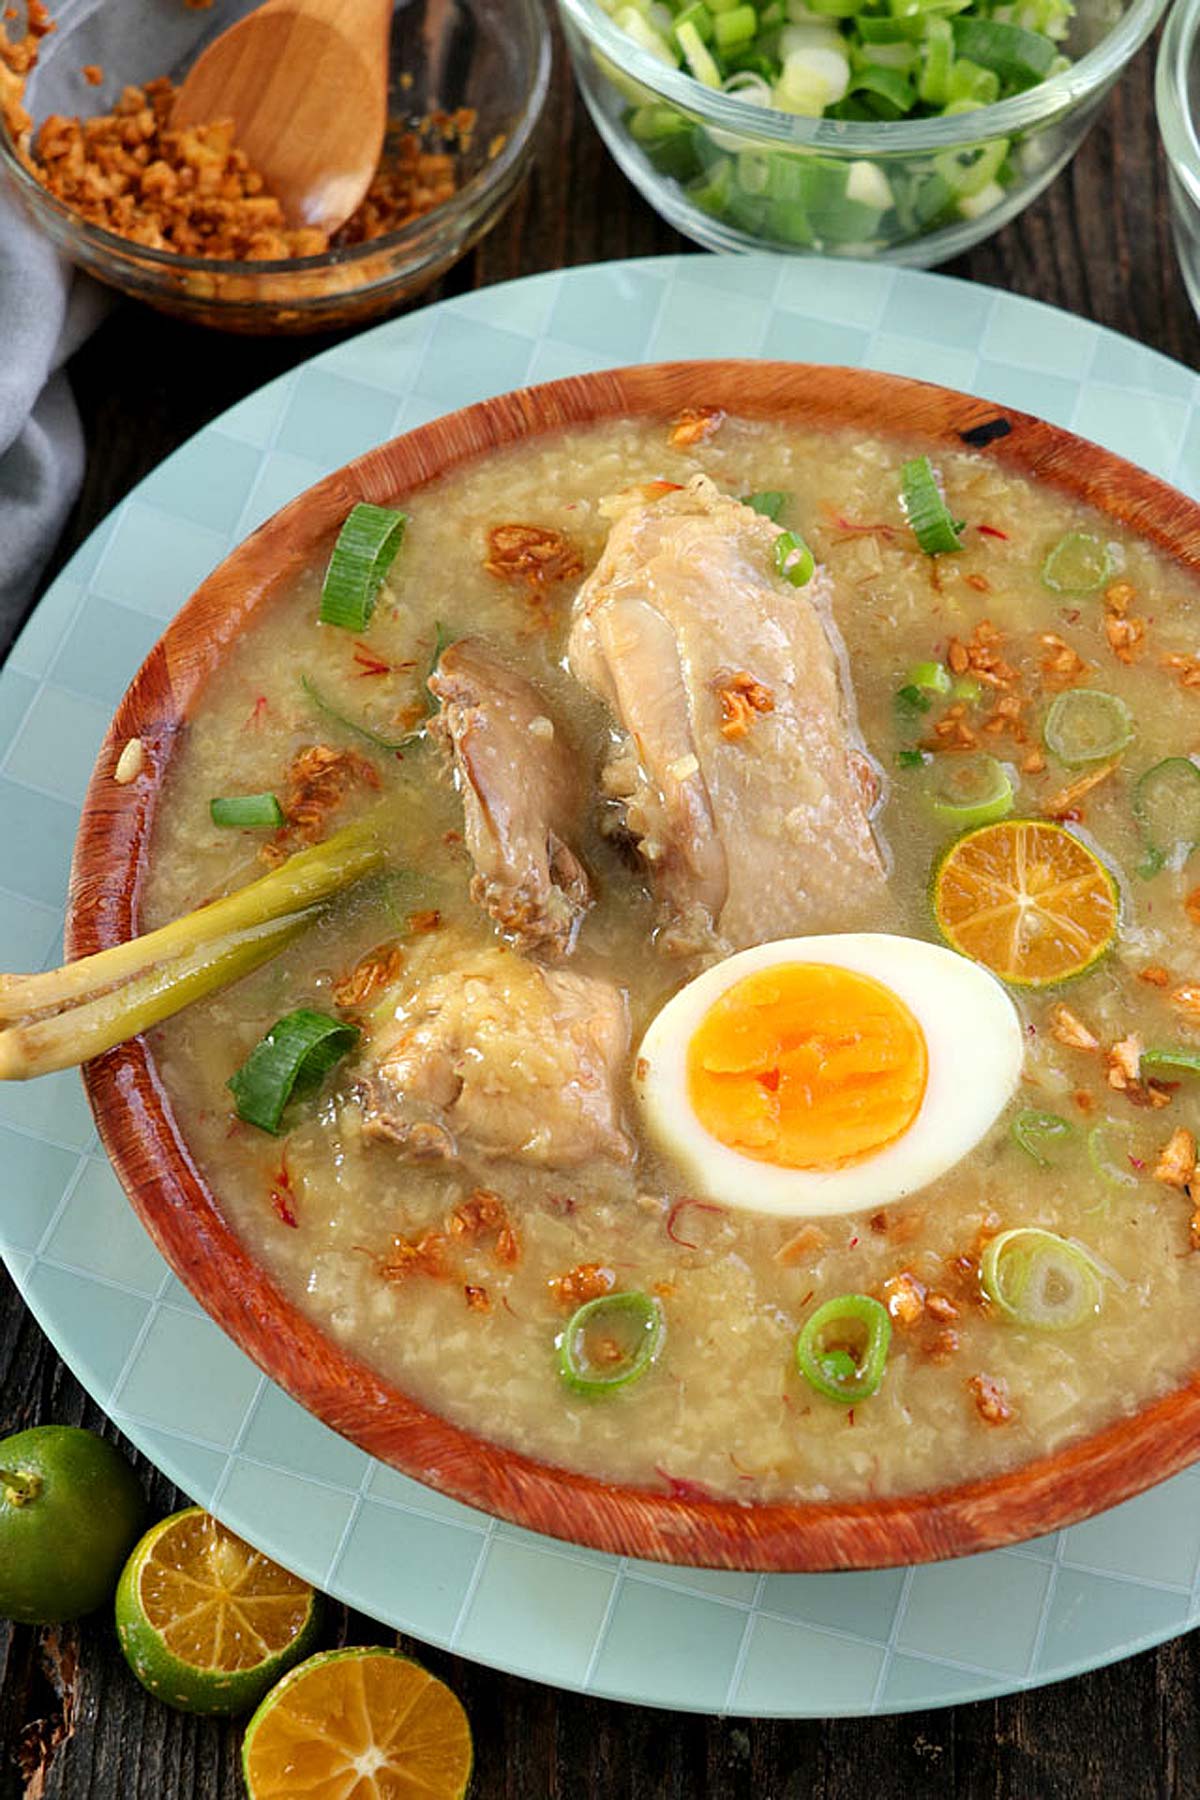 Filipino Arroz Caldo from glutinous rice, chicken, ginger, lemongrass with hard-boiled egg and brown garlic toppings